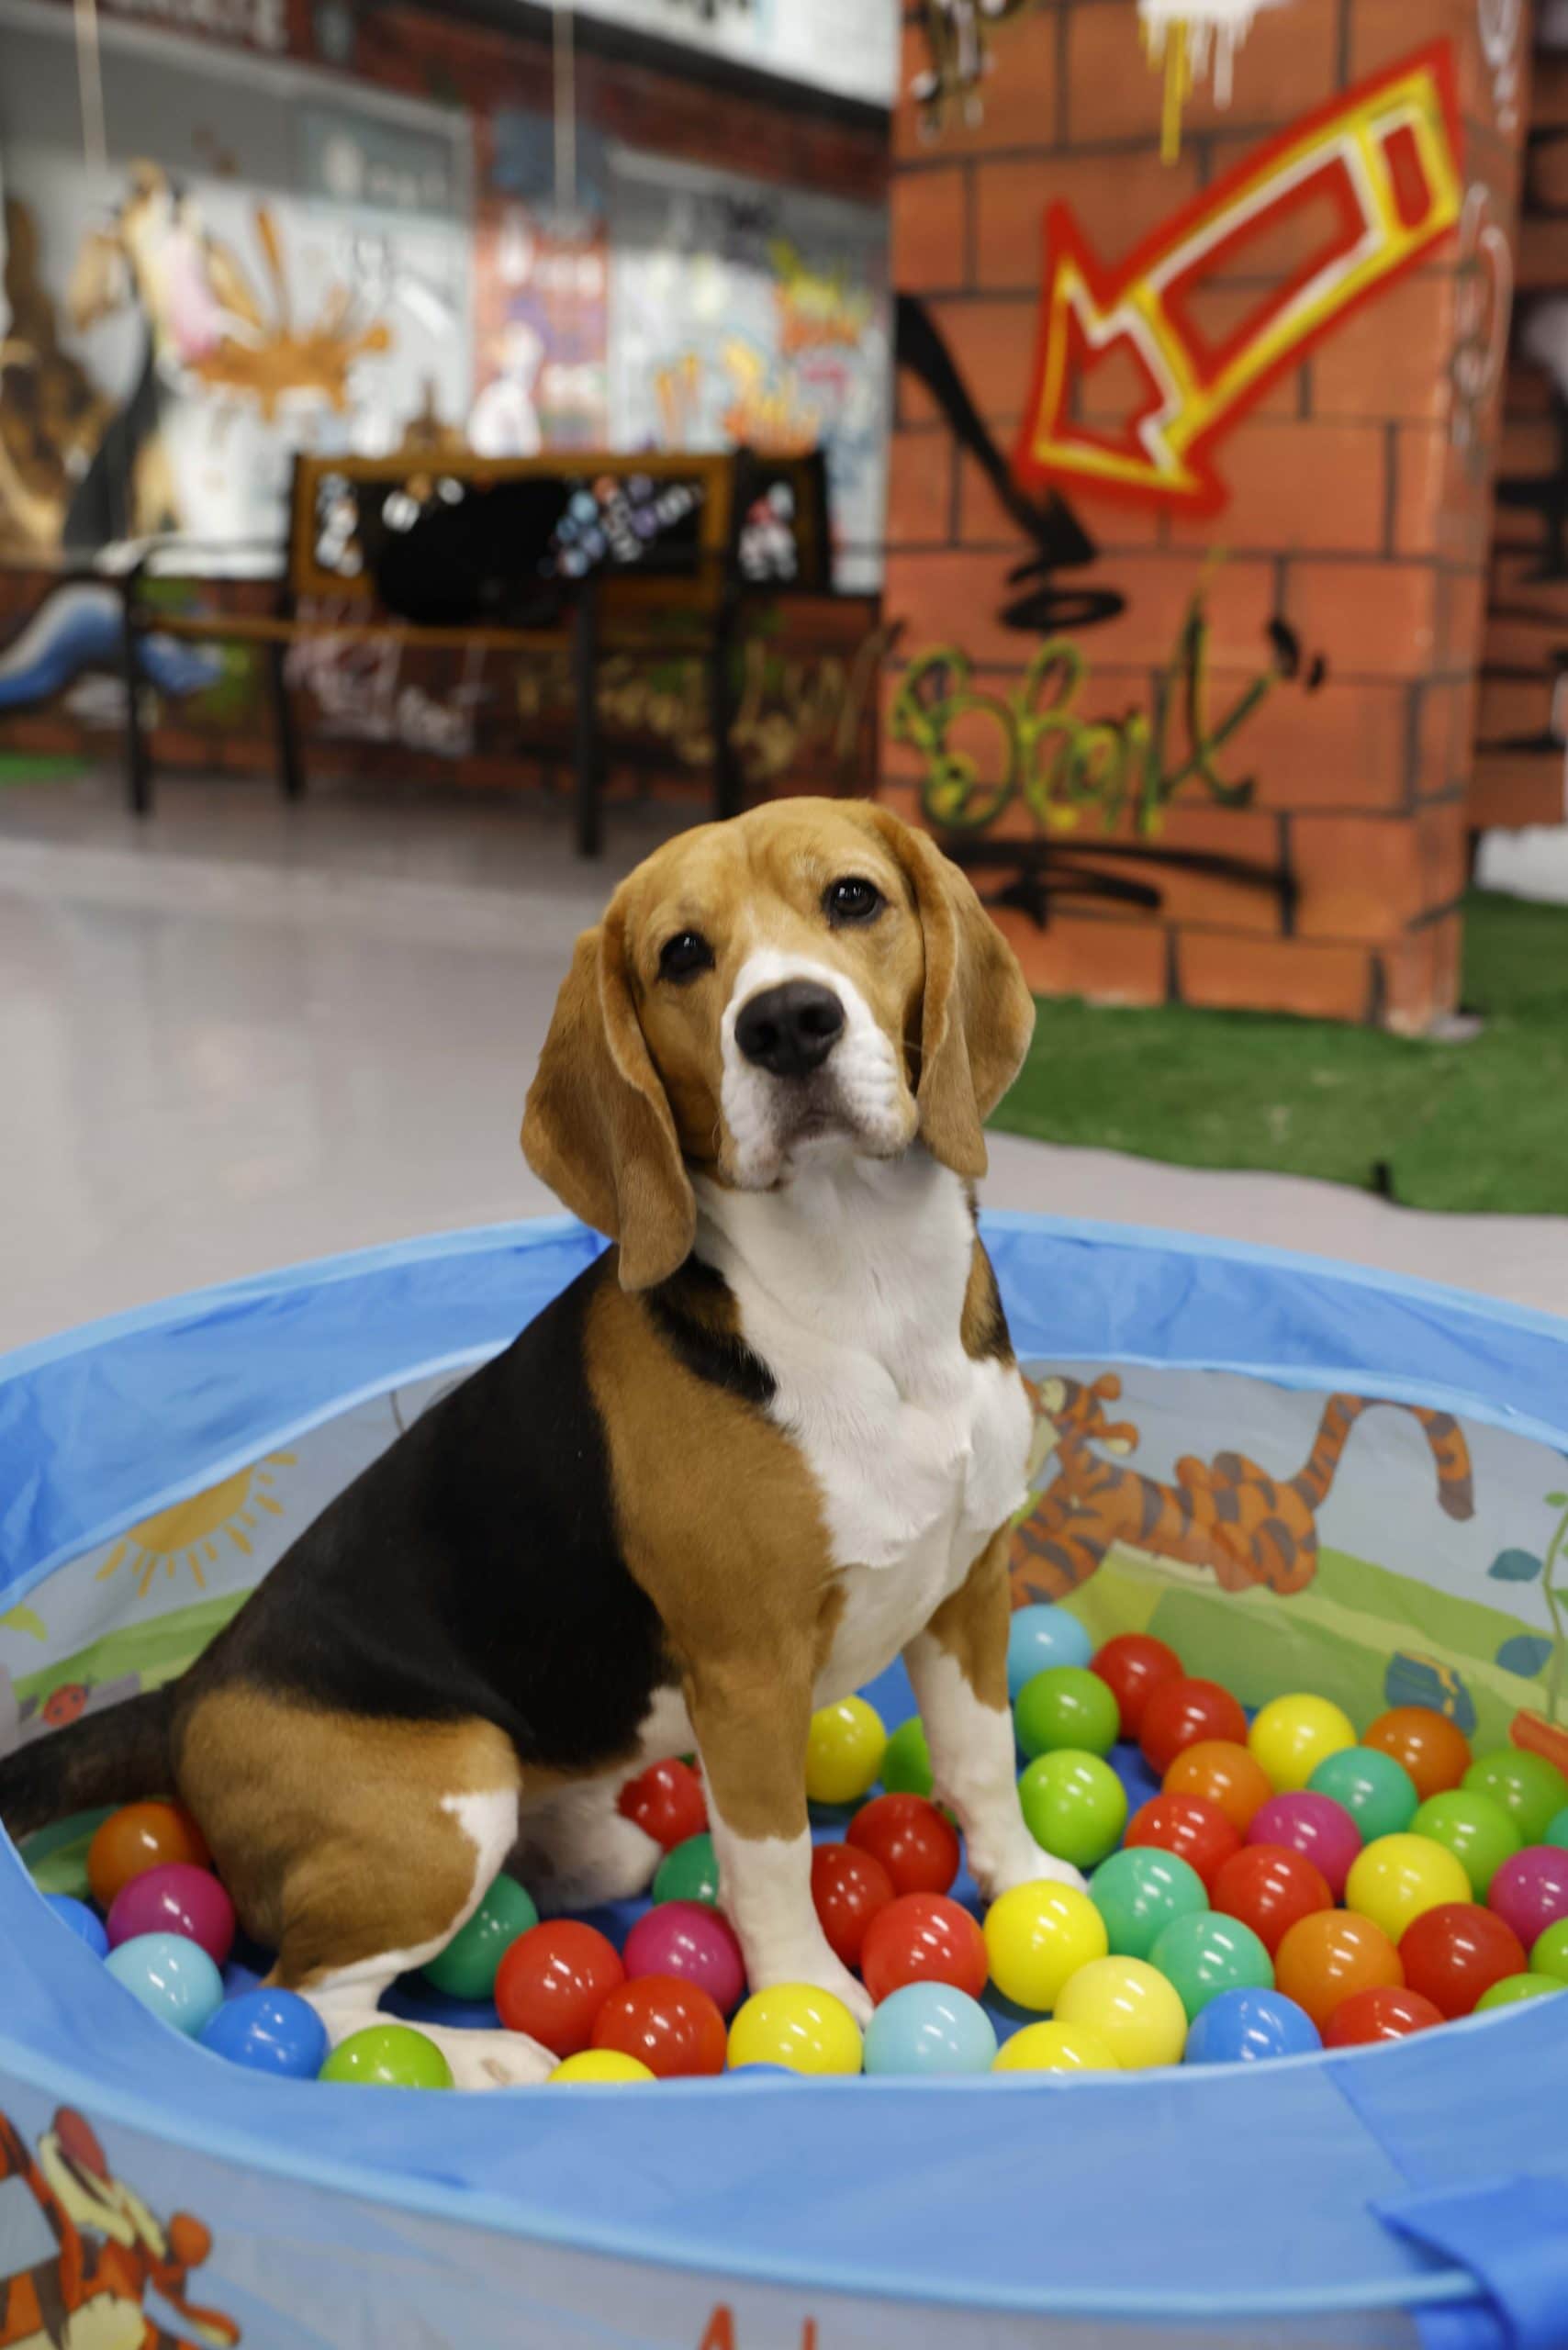 Doggy in ballpit